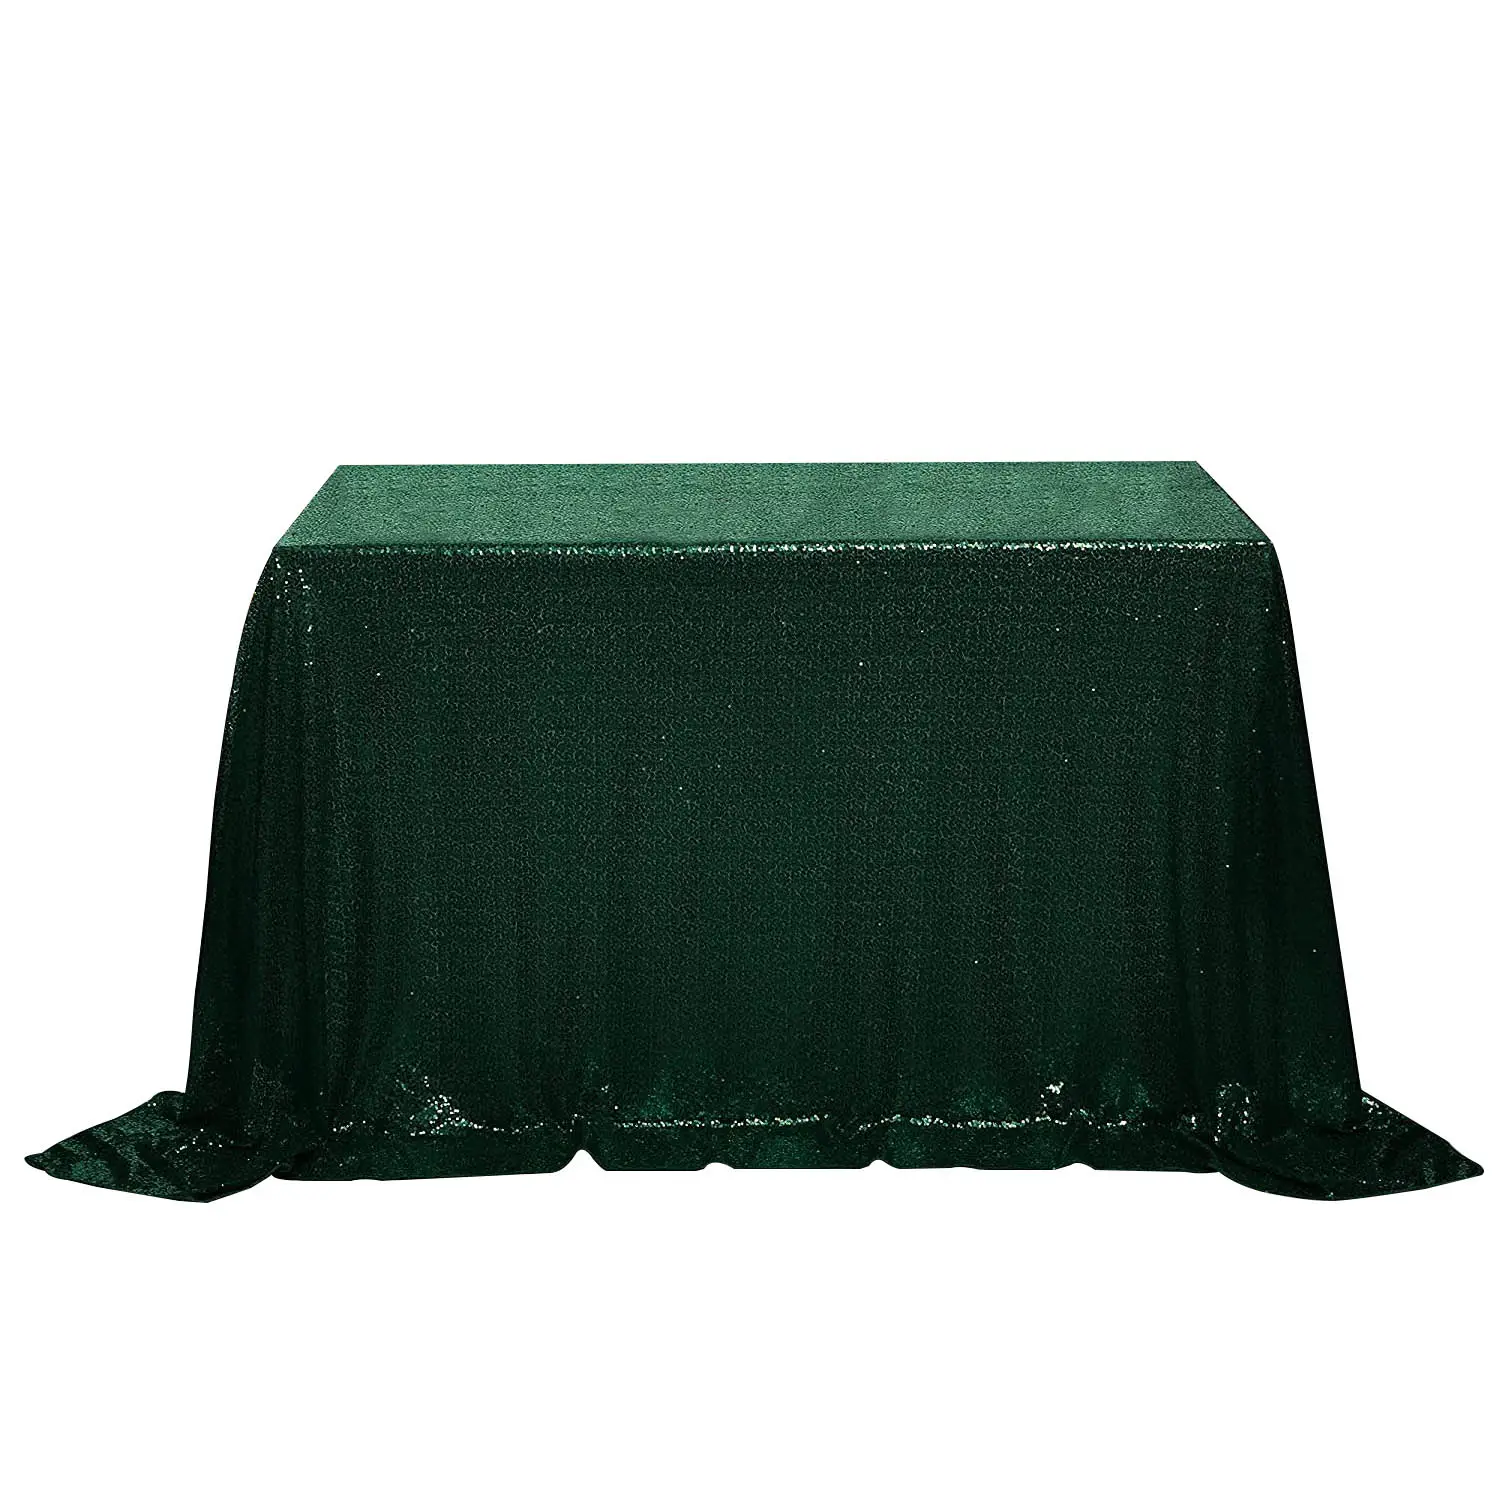 Cheap Sparkle Waterproof Banquet Home Table Cloth Lace Sequin Dark Green Rectangle Tablecloth Wedding Birthday Party Decoration